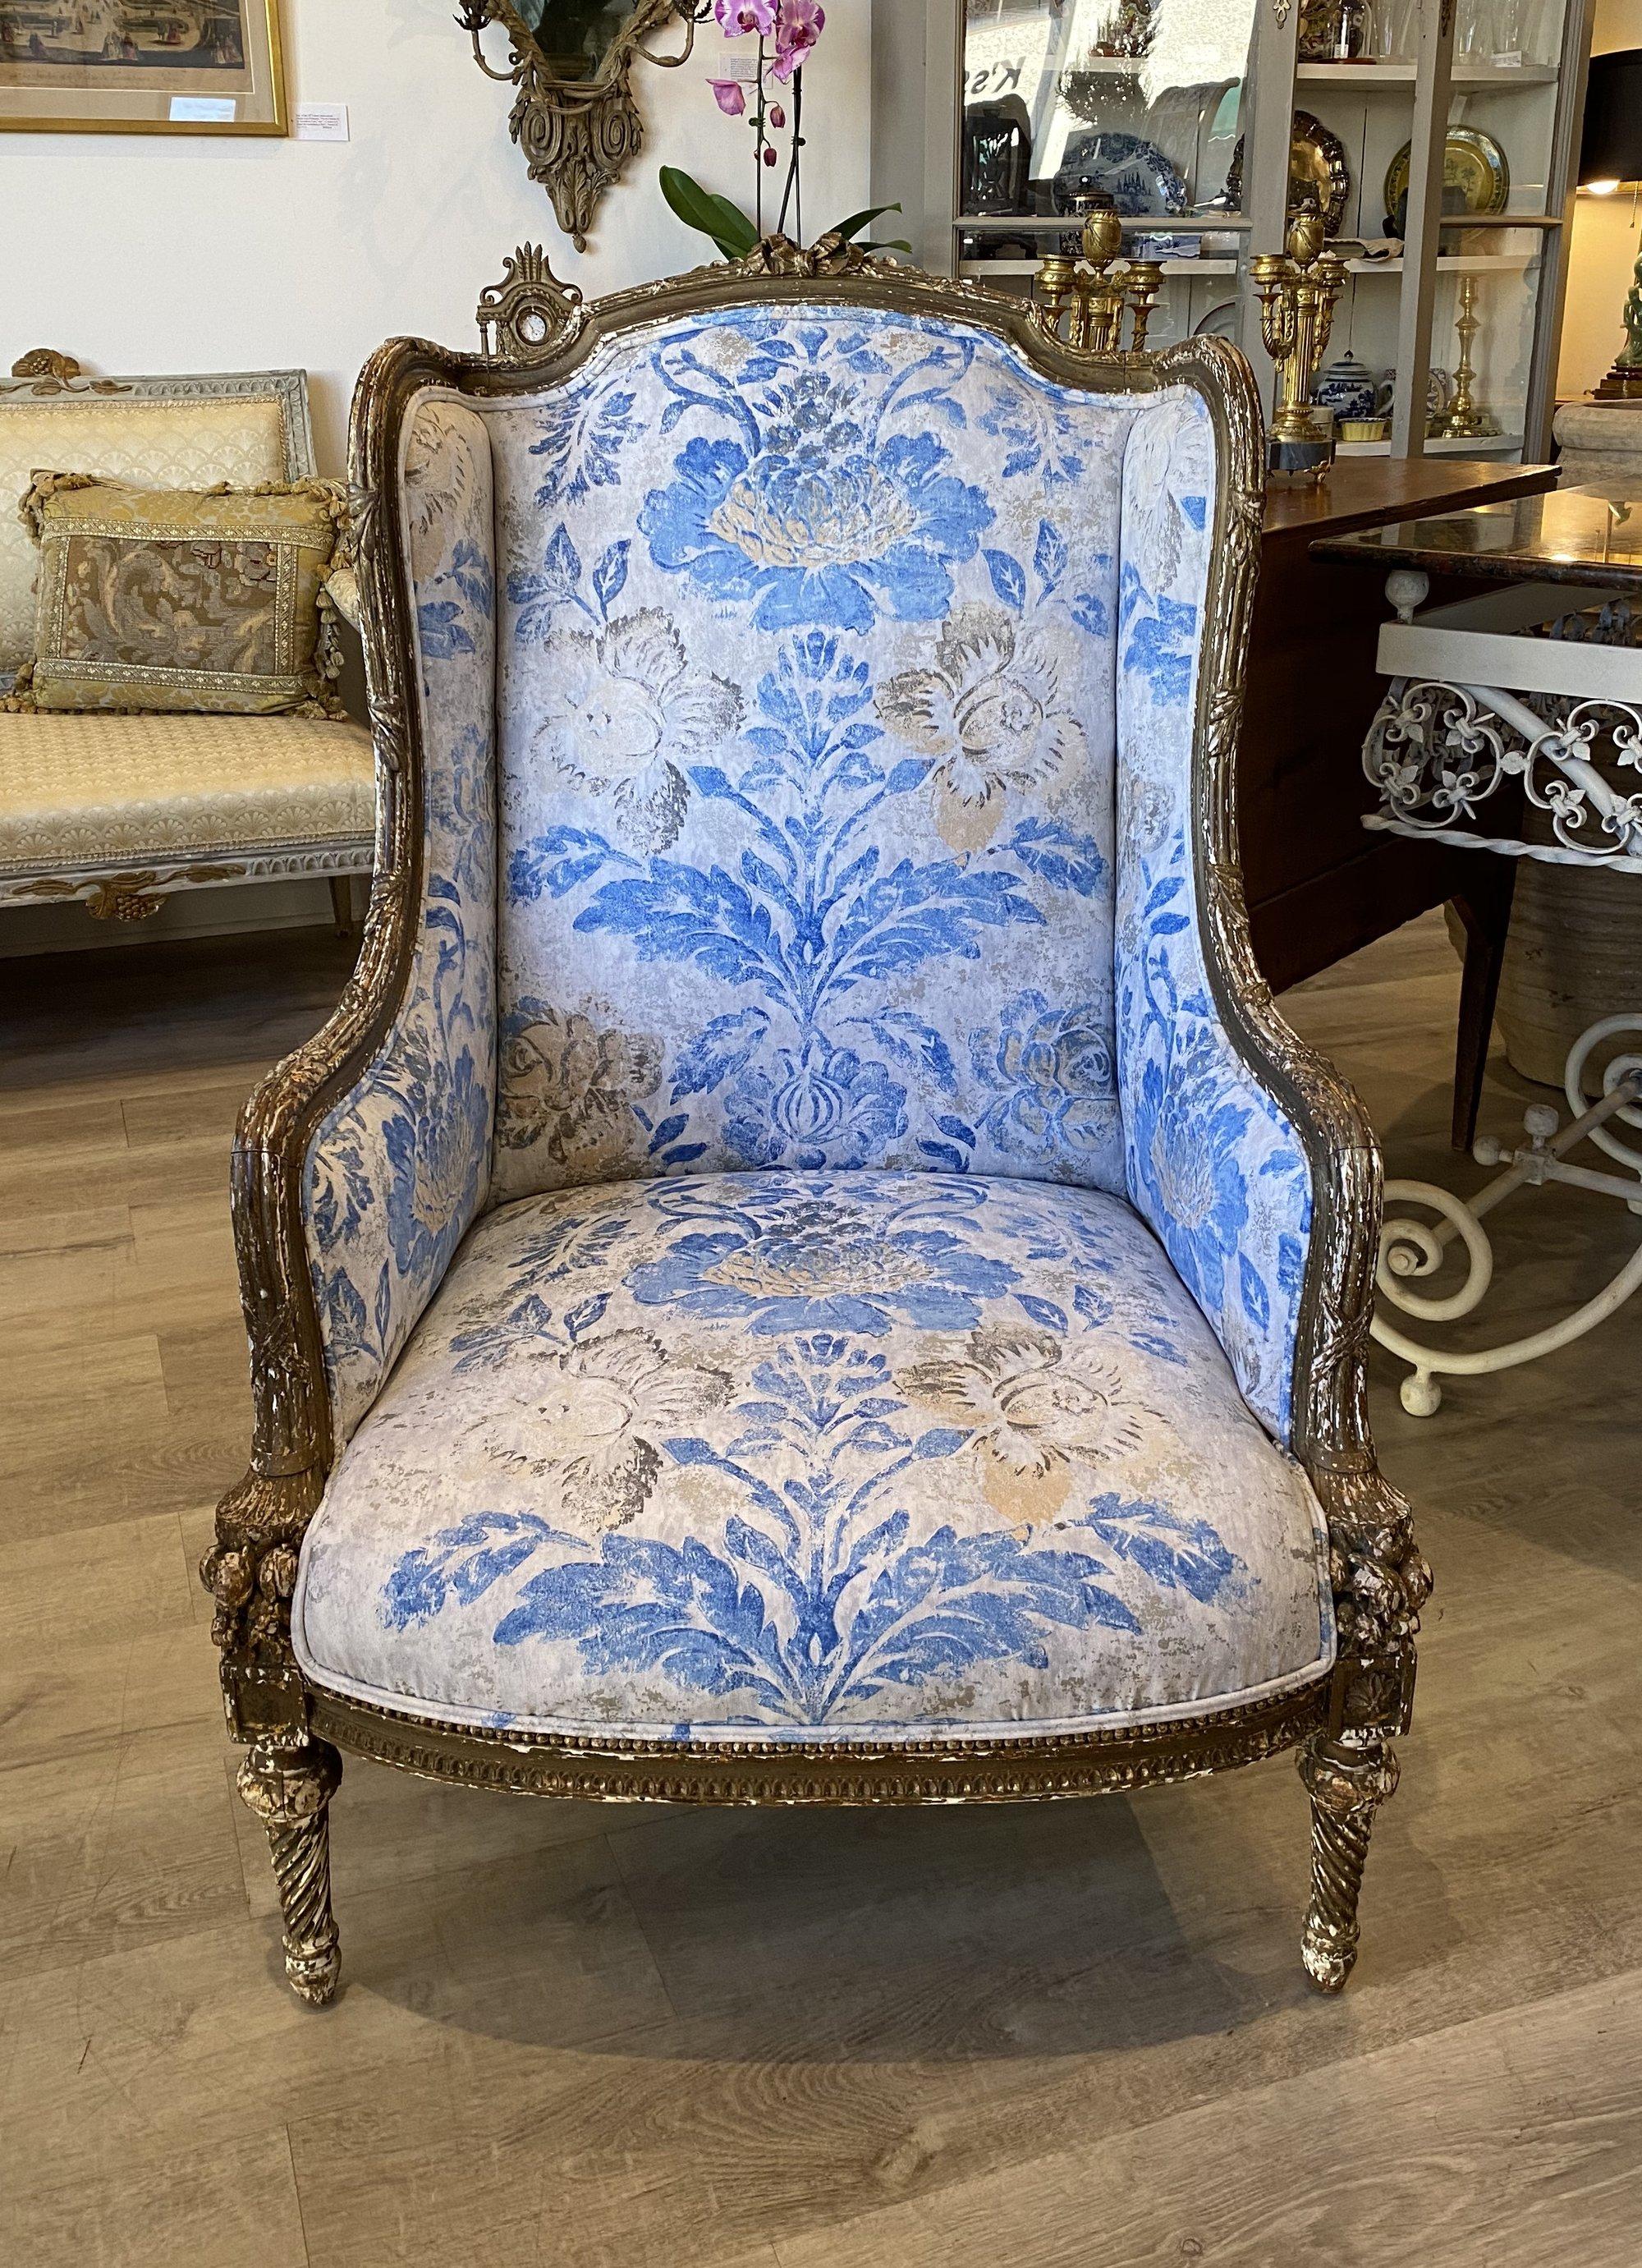 Louis XVI Berger an Oreilles, armchair, early 18th-late 19th century, 18th century or later, carved and giltwood, crested by a French bow with channeling, terminating in a cornucopia; spiral turned legs. Newly upholstered in Designer’s Guild fabric.